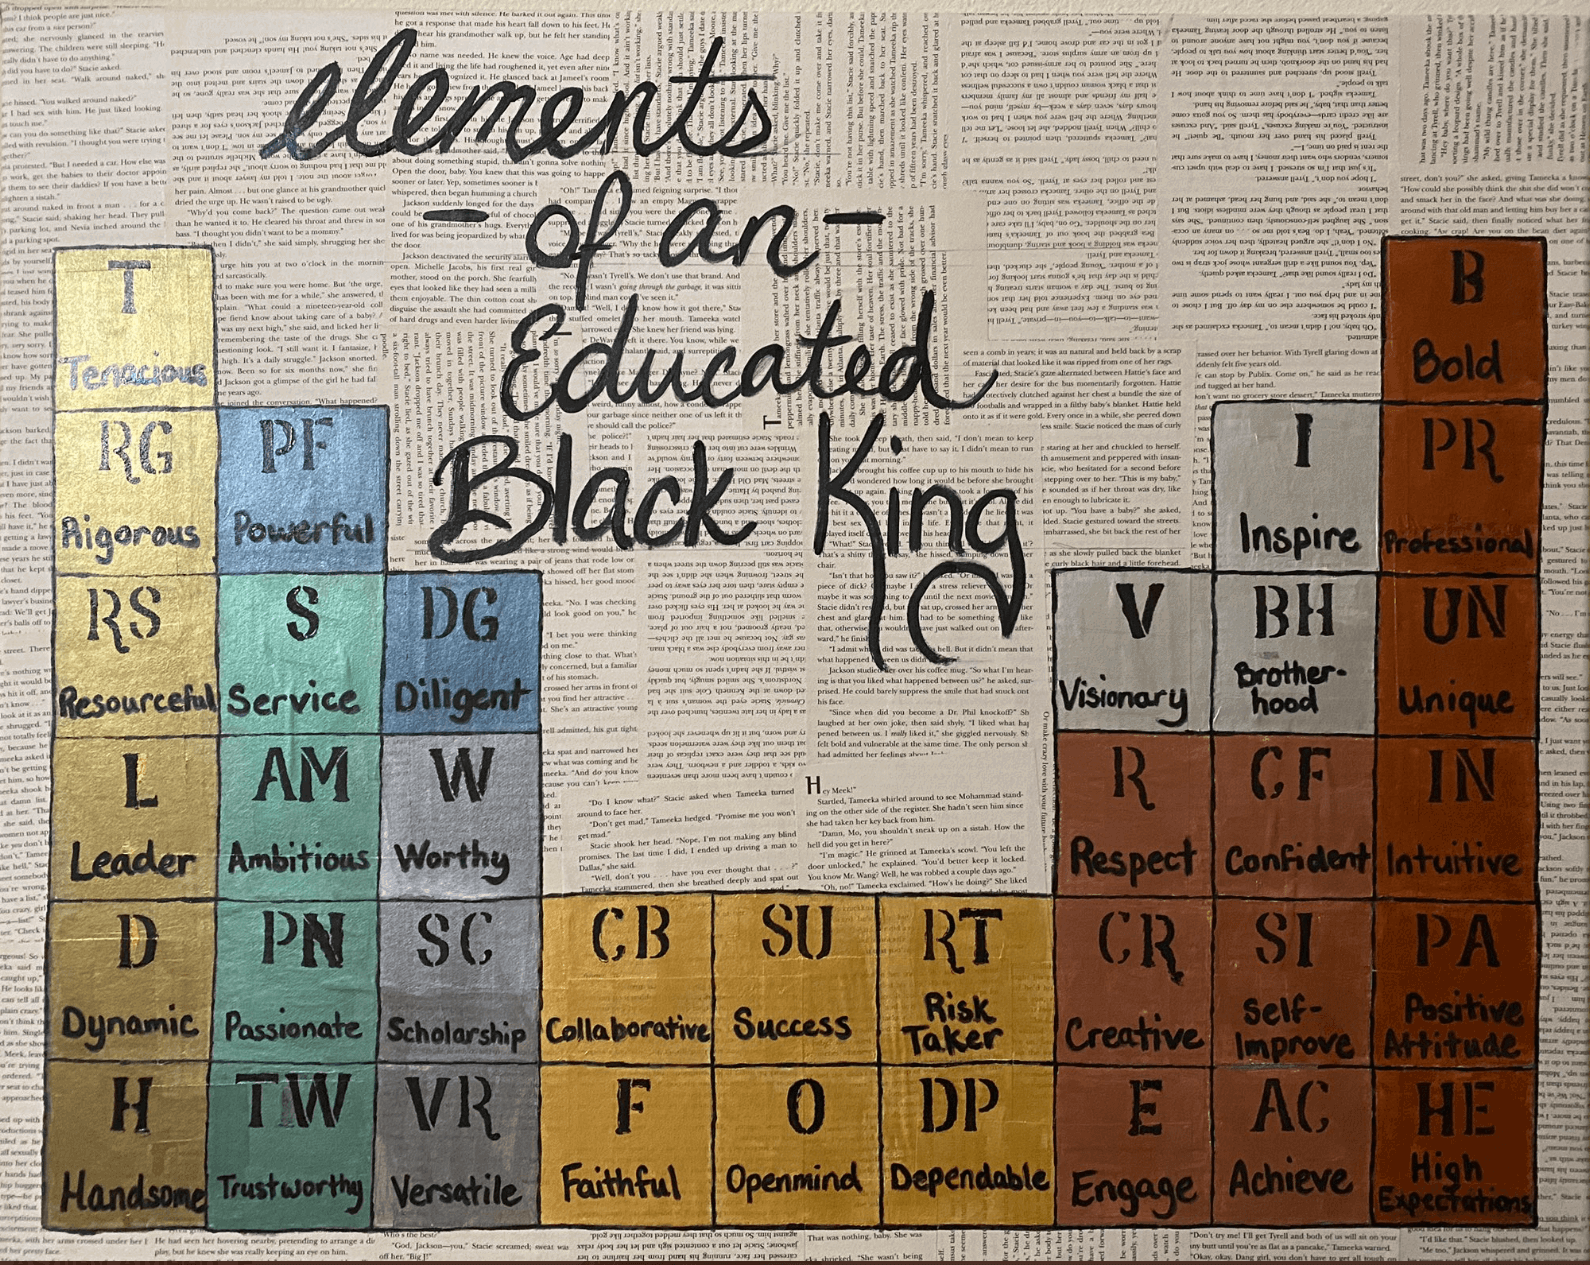 Elements of an Educated Black King